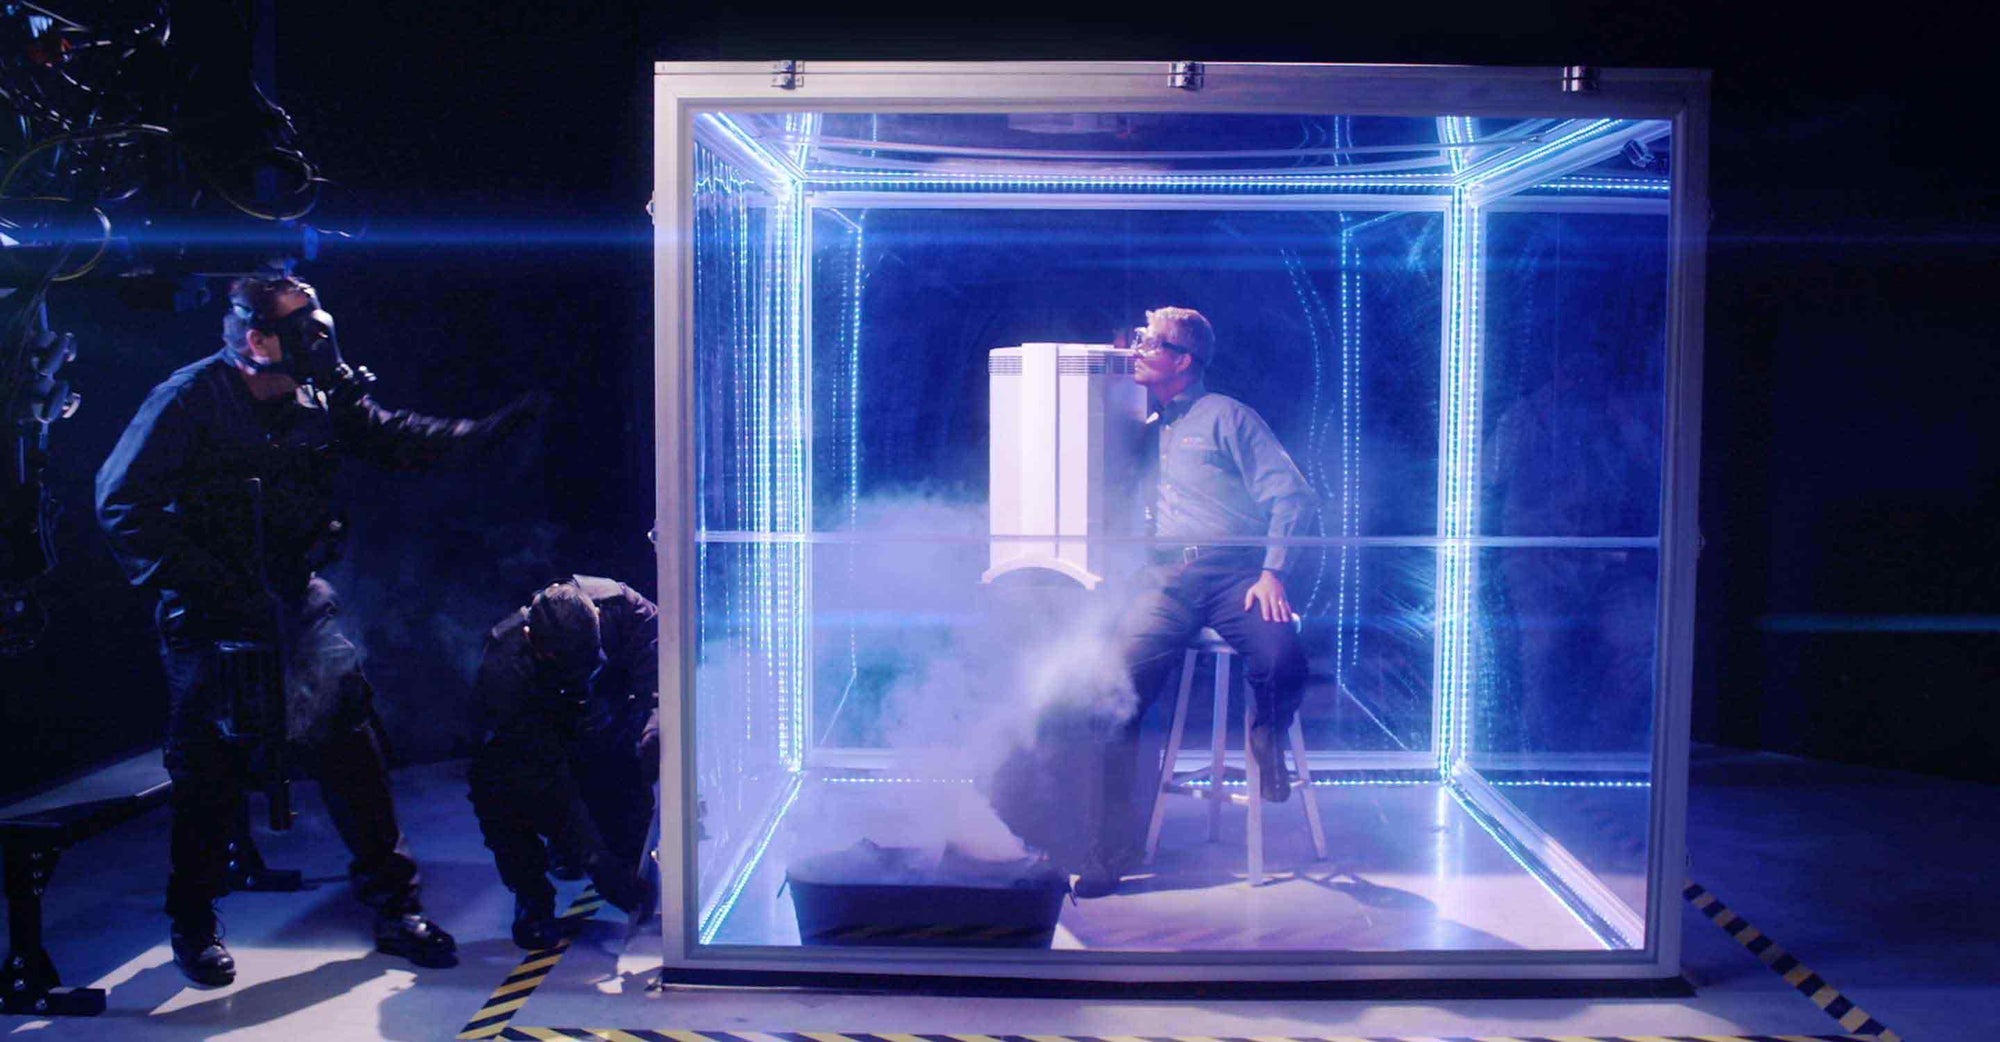 President Frank Hammes in Smoke Chamber with nothing other than an IQAir HealthPro Series air purifier